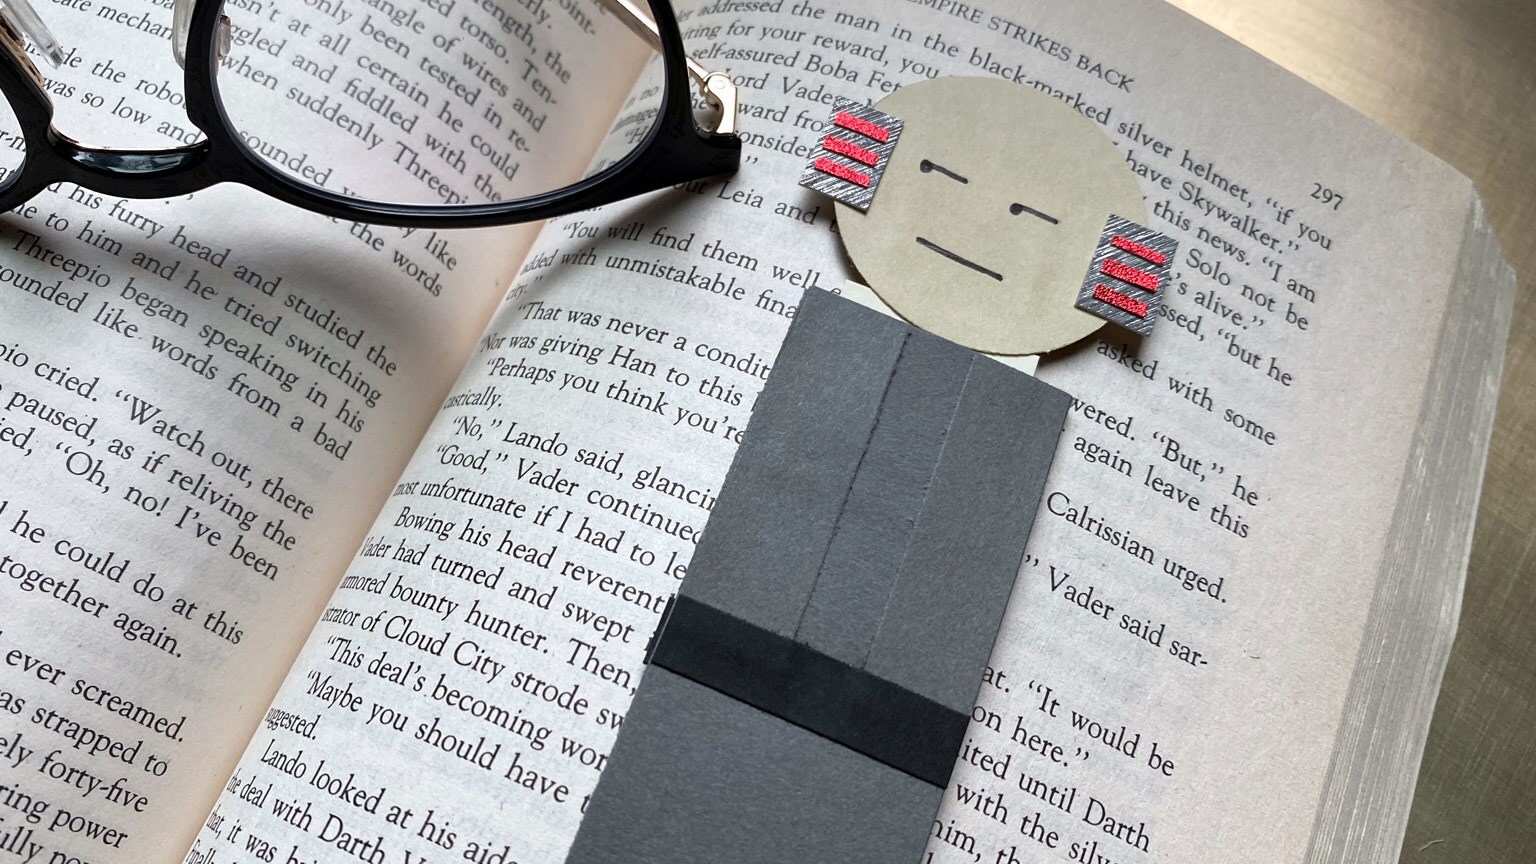 Empire at 40 | Save Your Spot With This DIY Lobot Bookmark